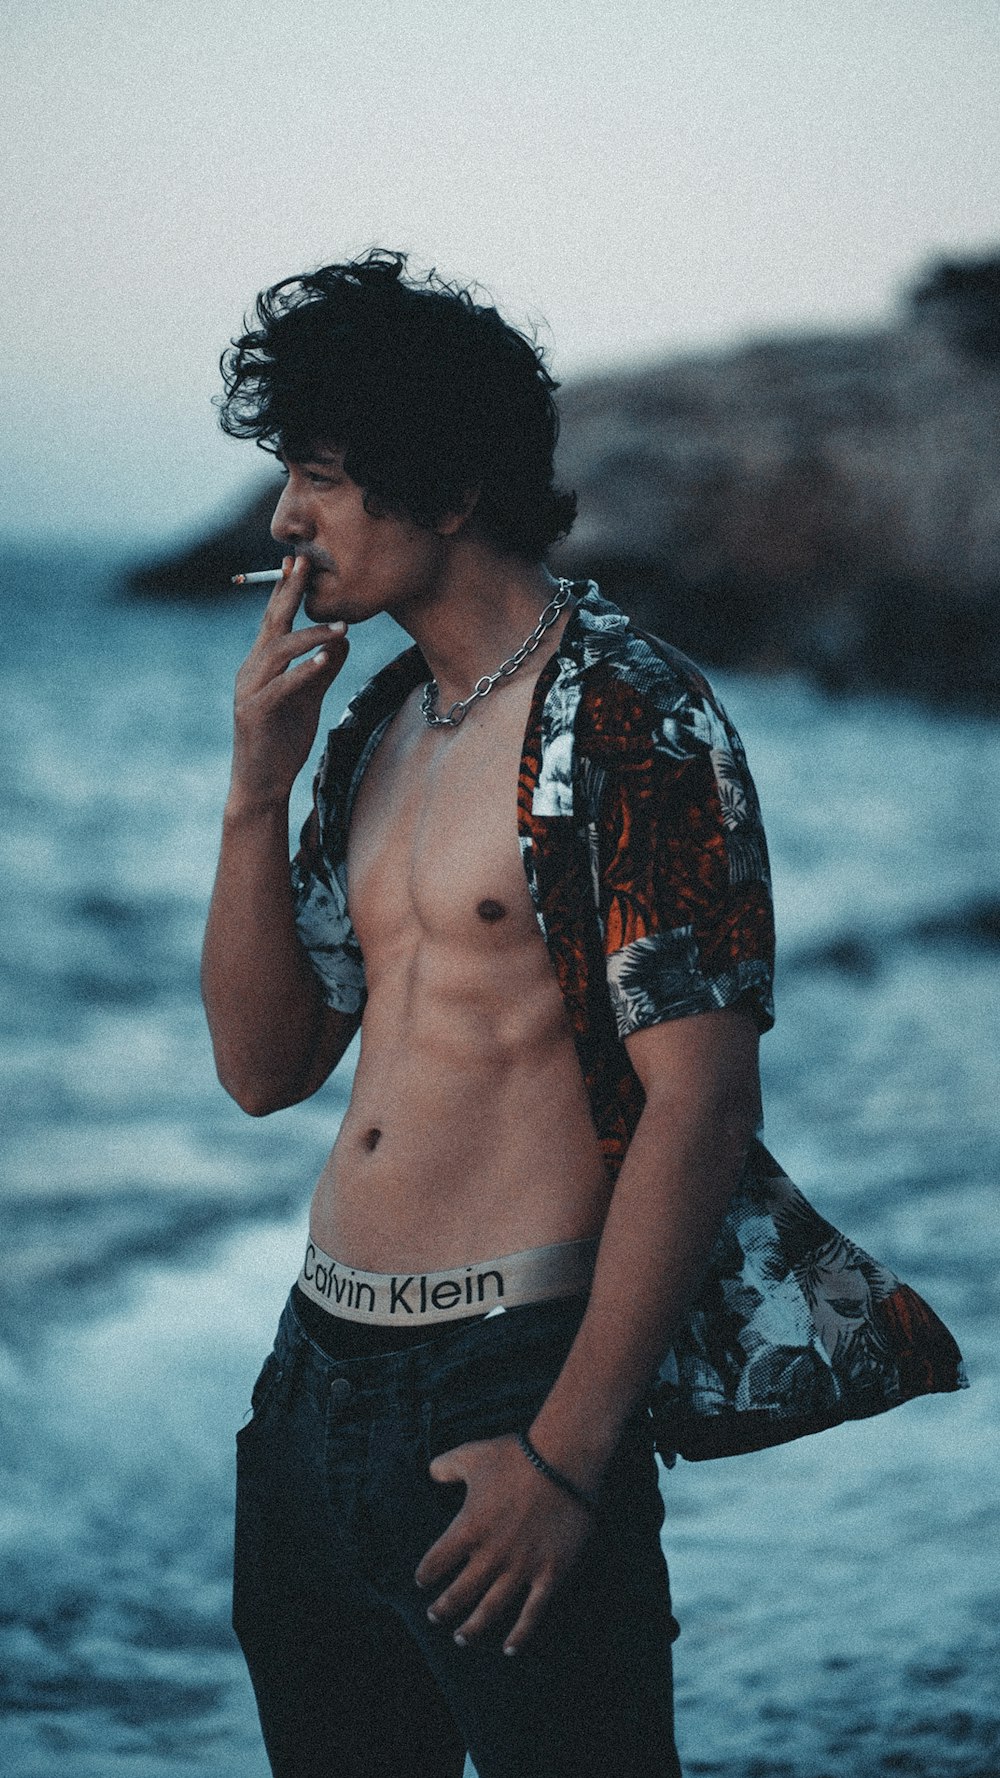 a shirtless man smoking a cigarette by the ocean